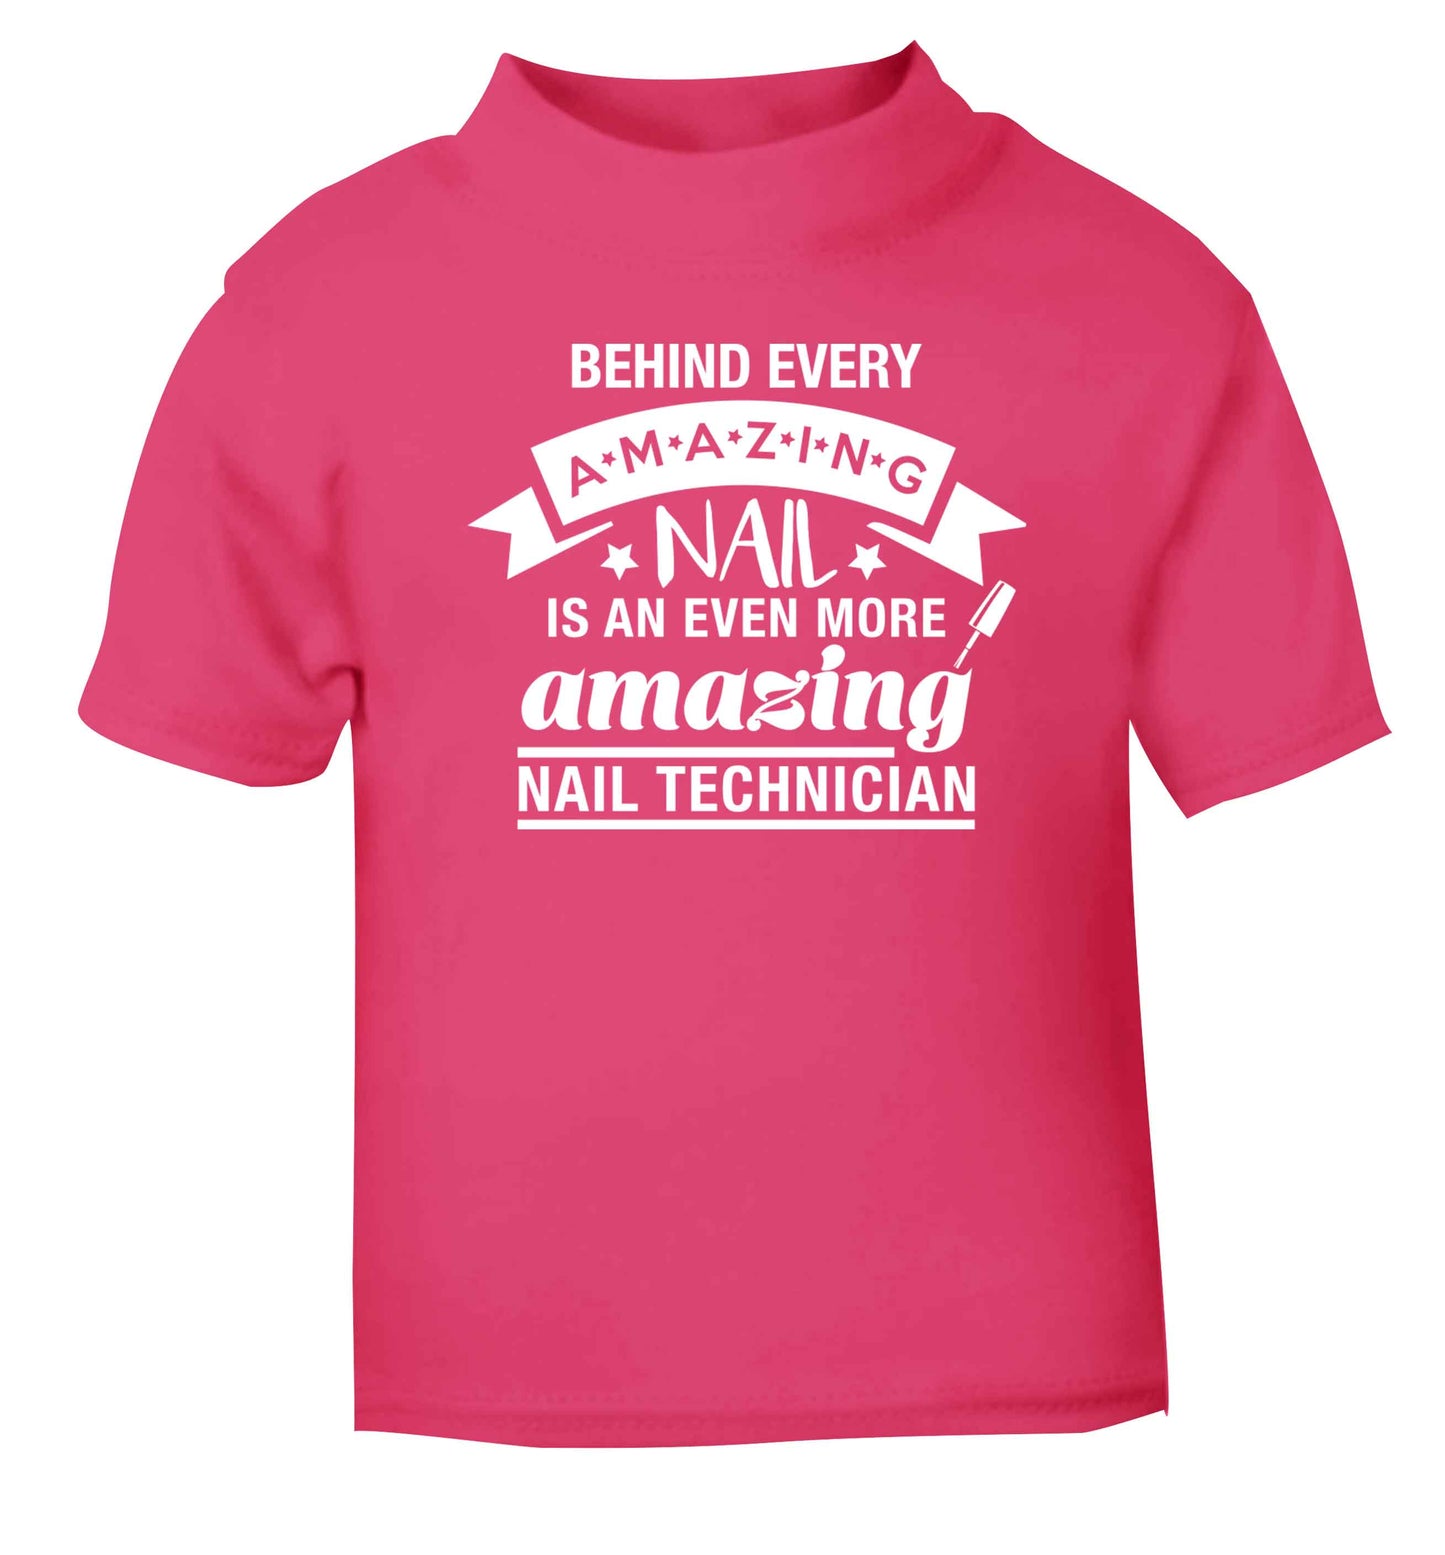 Behind every amazing nail is an even more amazing nail technician pink baby toddler Tshirt 2 Years